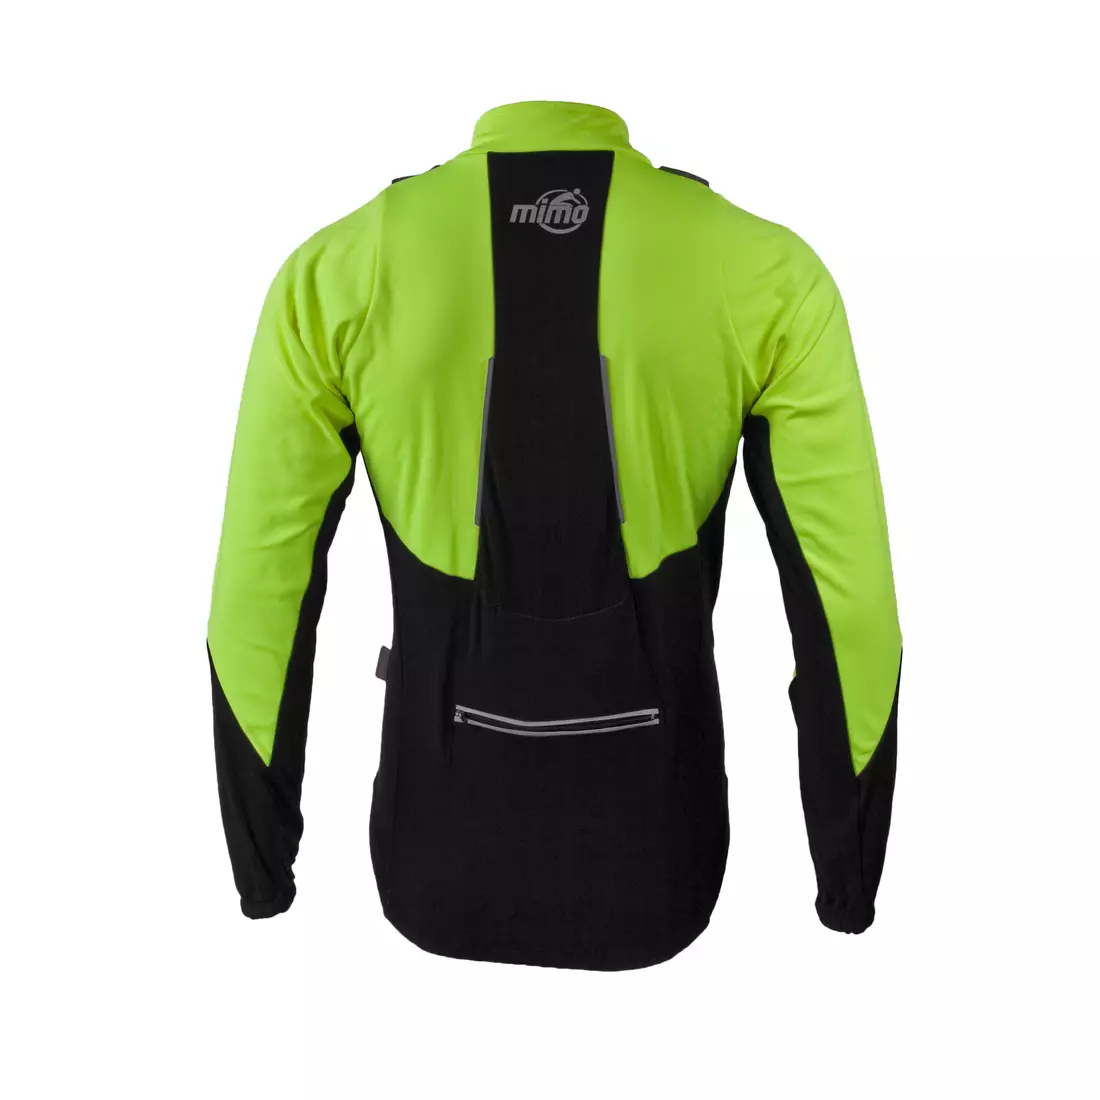 MikeSPORT DRAGON softshell cycling jacket black and fluorine